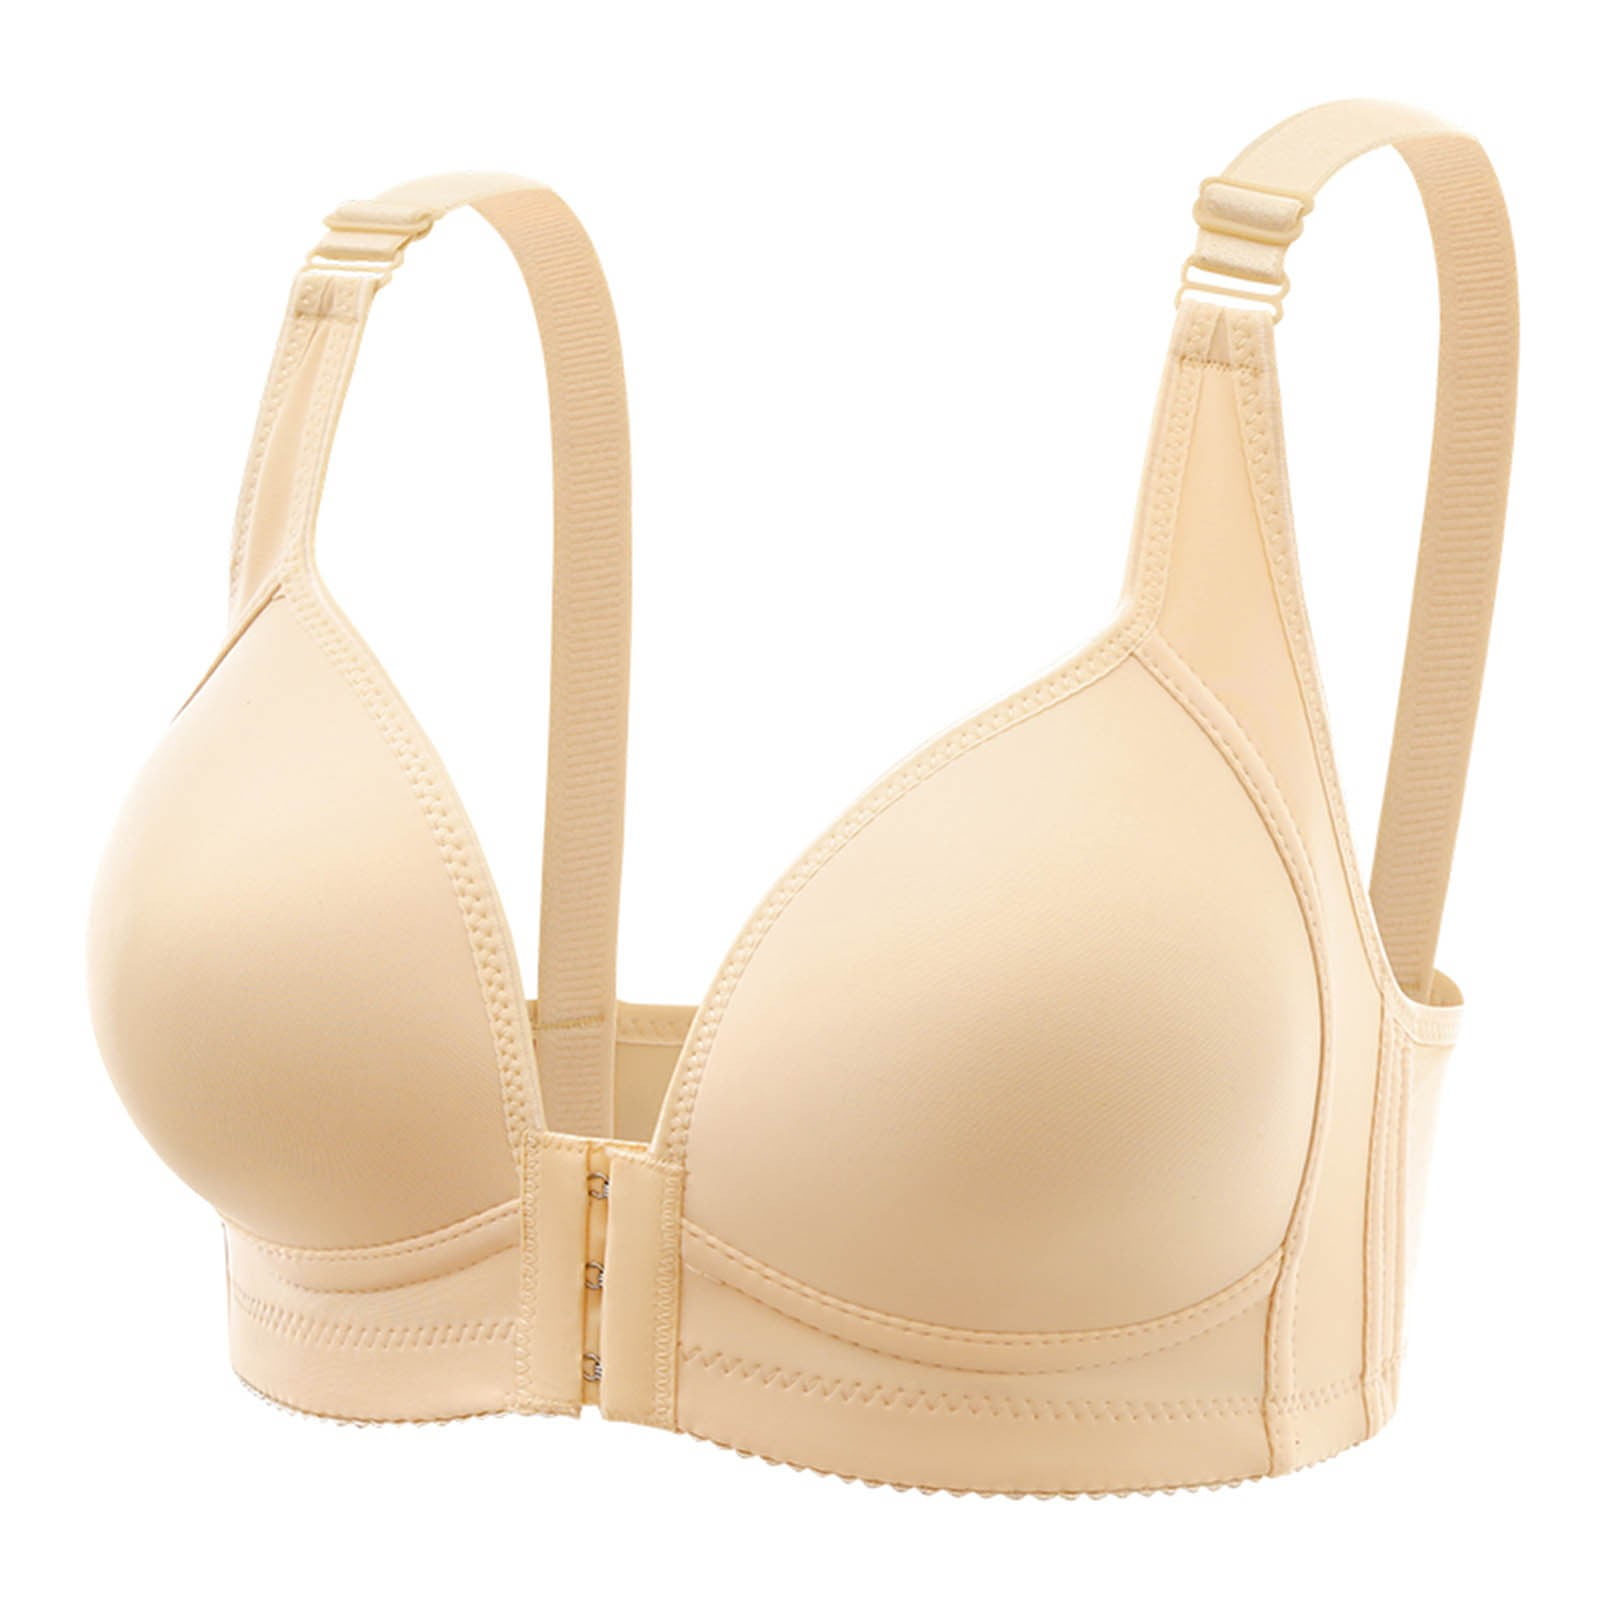 RYDCOT Womens Bras Large Size Sthin mold cup, air hole, smooth